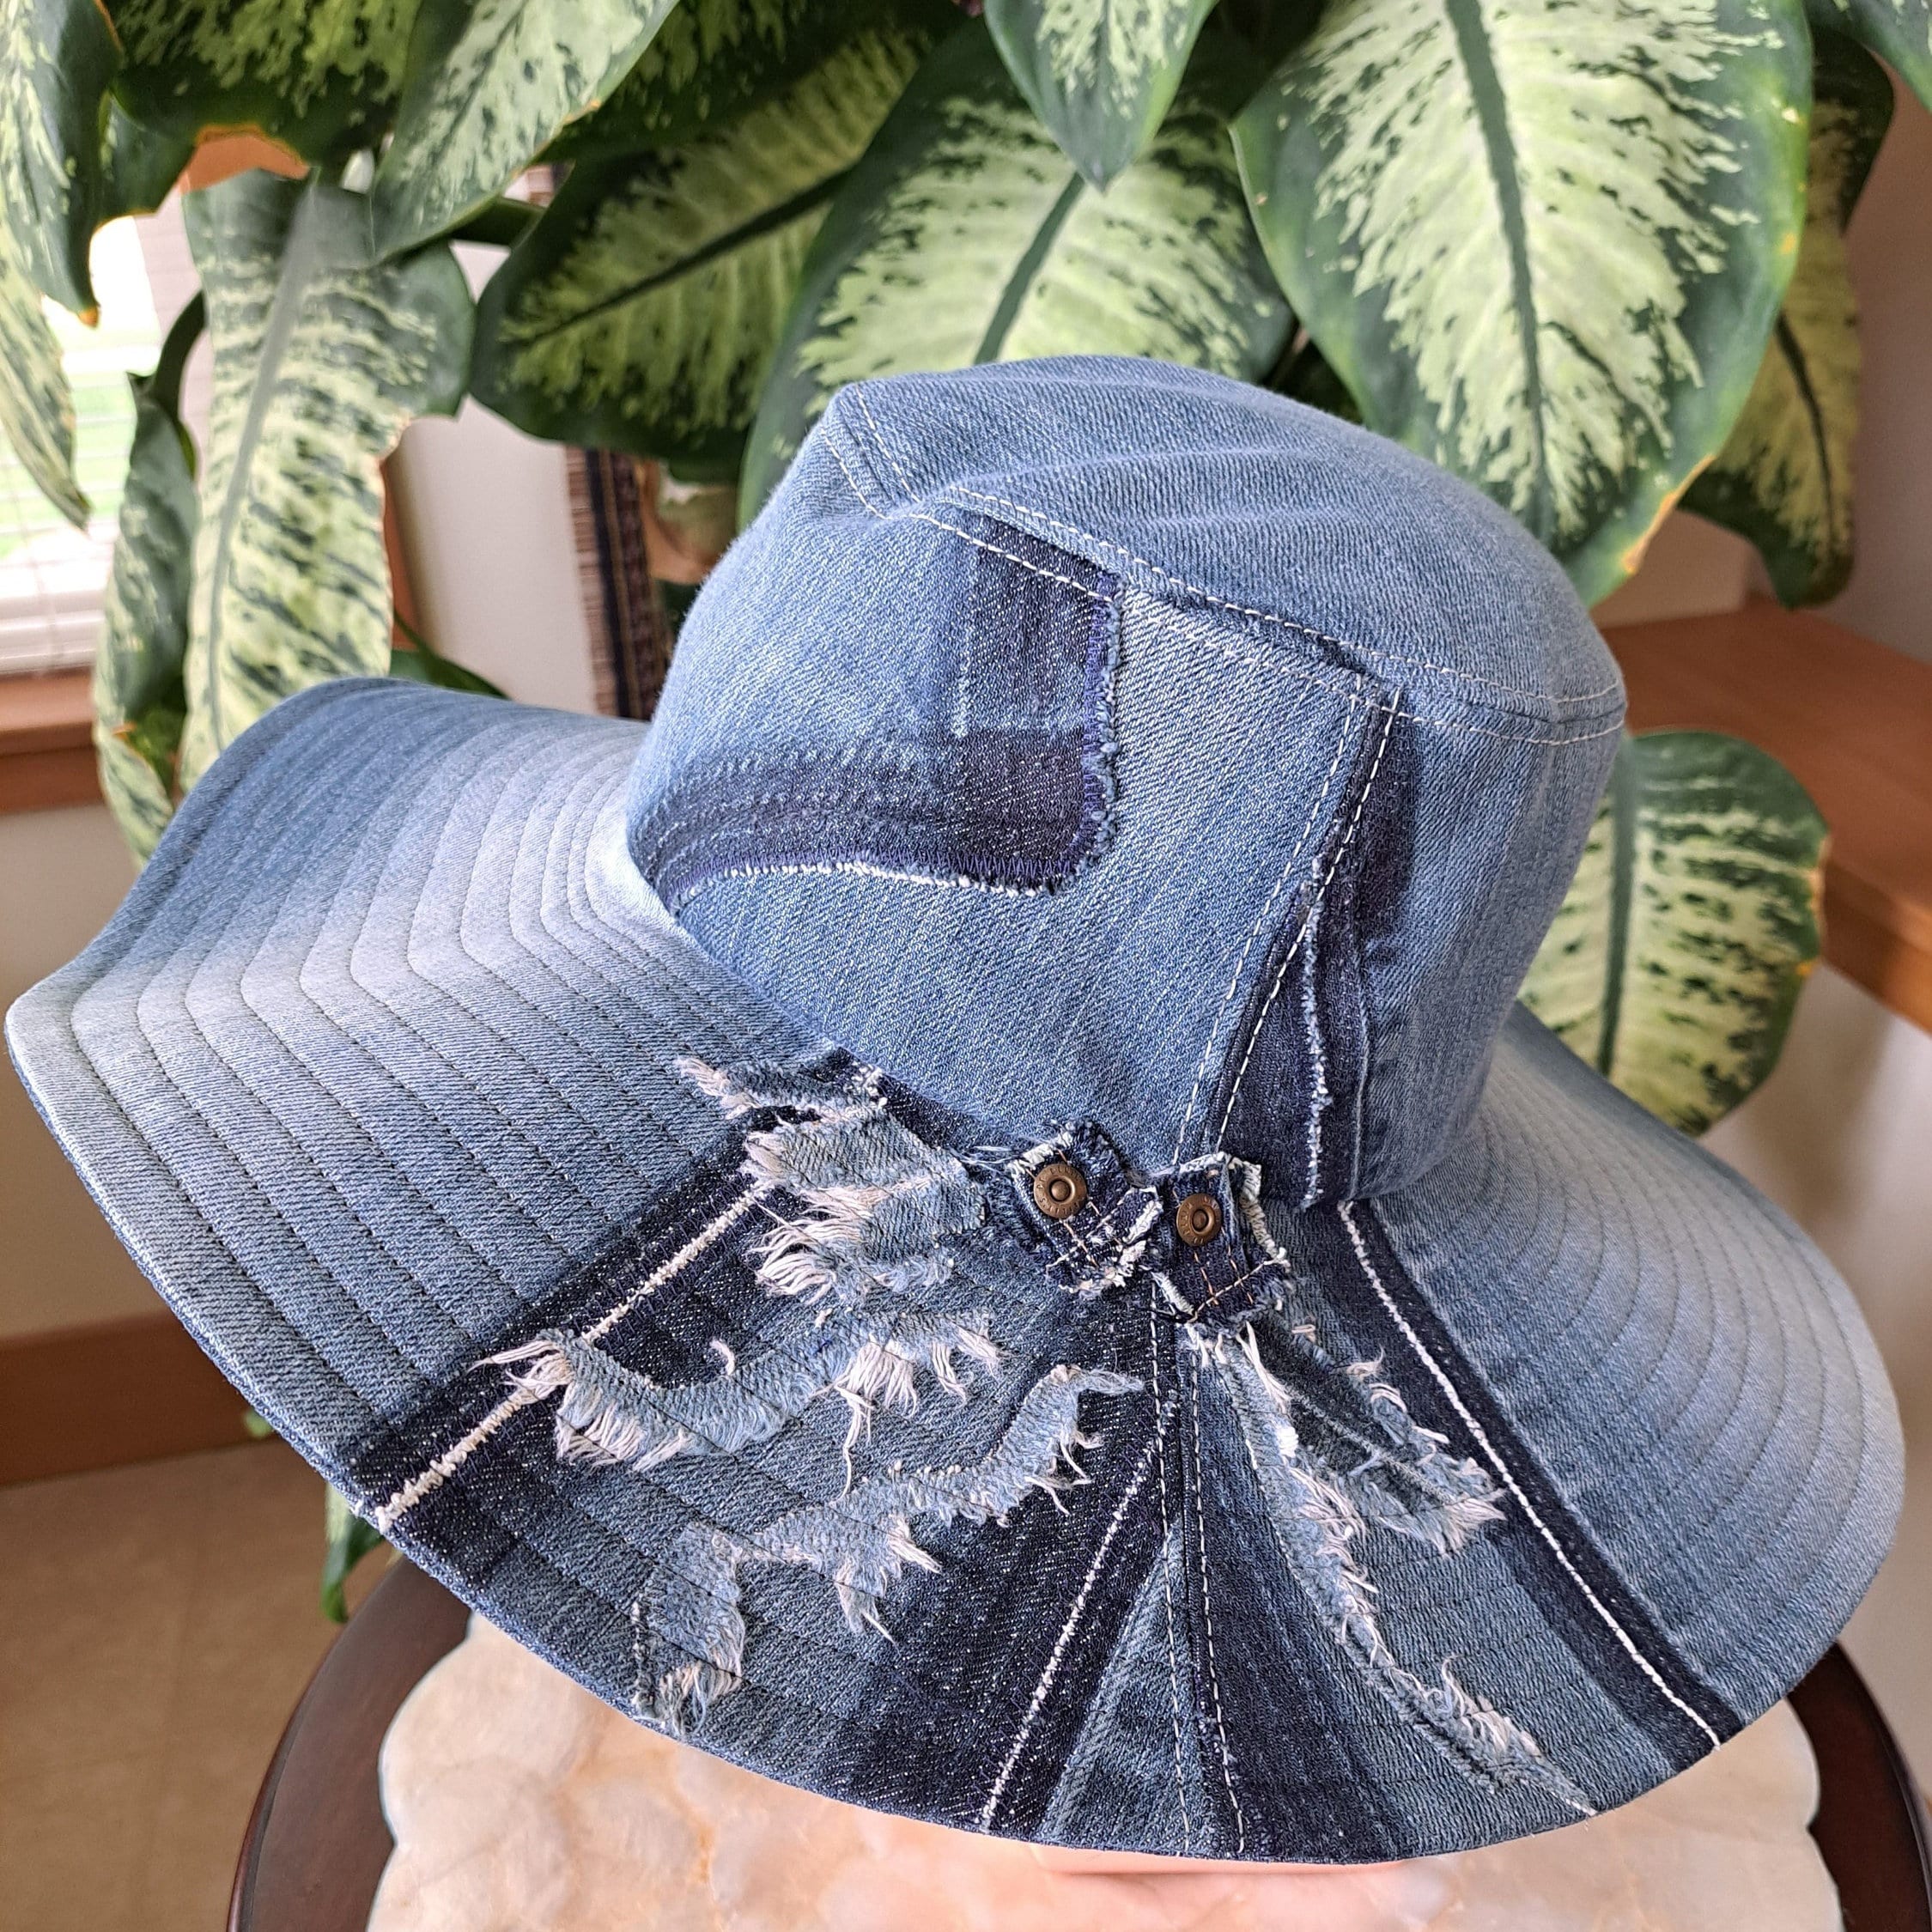 Patchwork Denim Bucket Hat Recycled Jeans Upcycled 